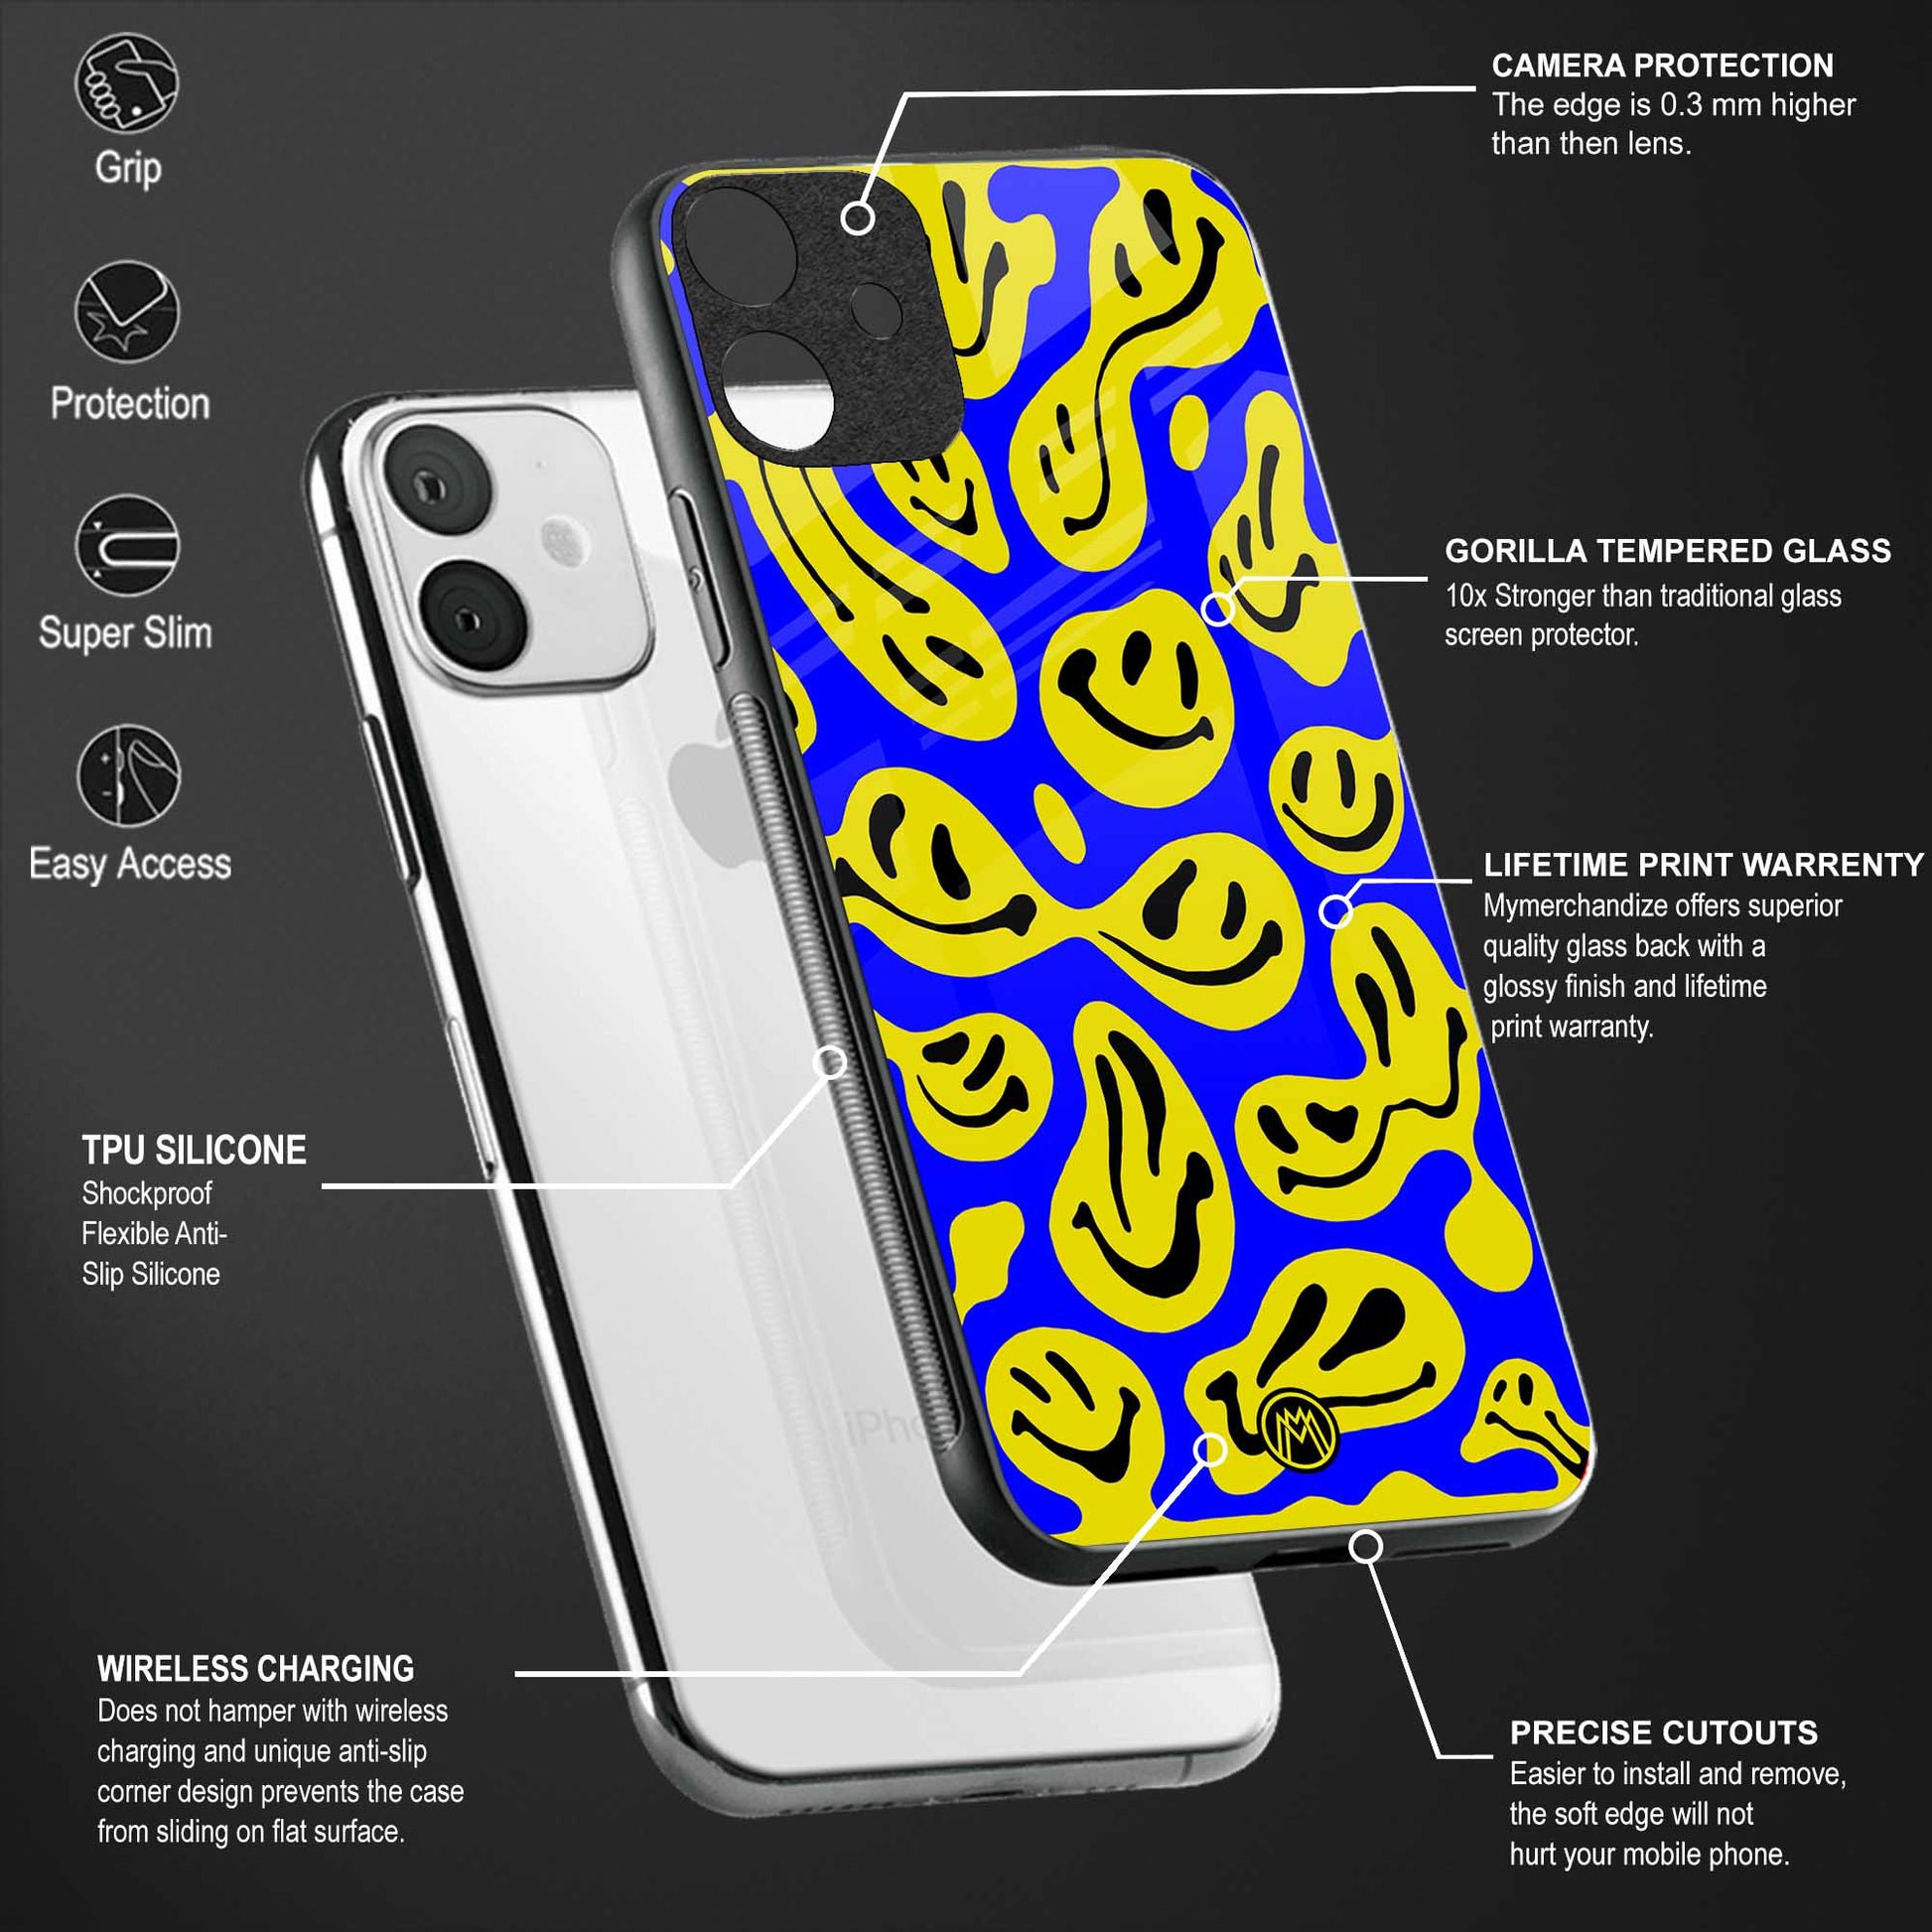 acid smiles yellow blue glass case for iphone x image-4